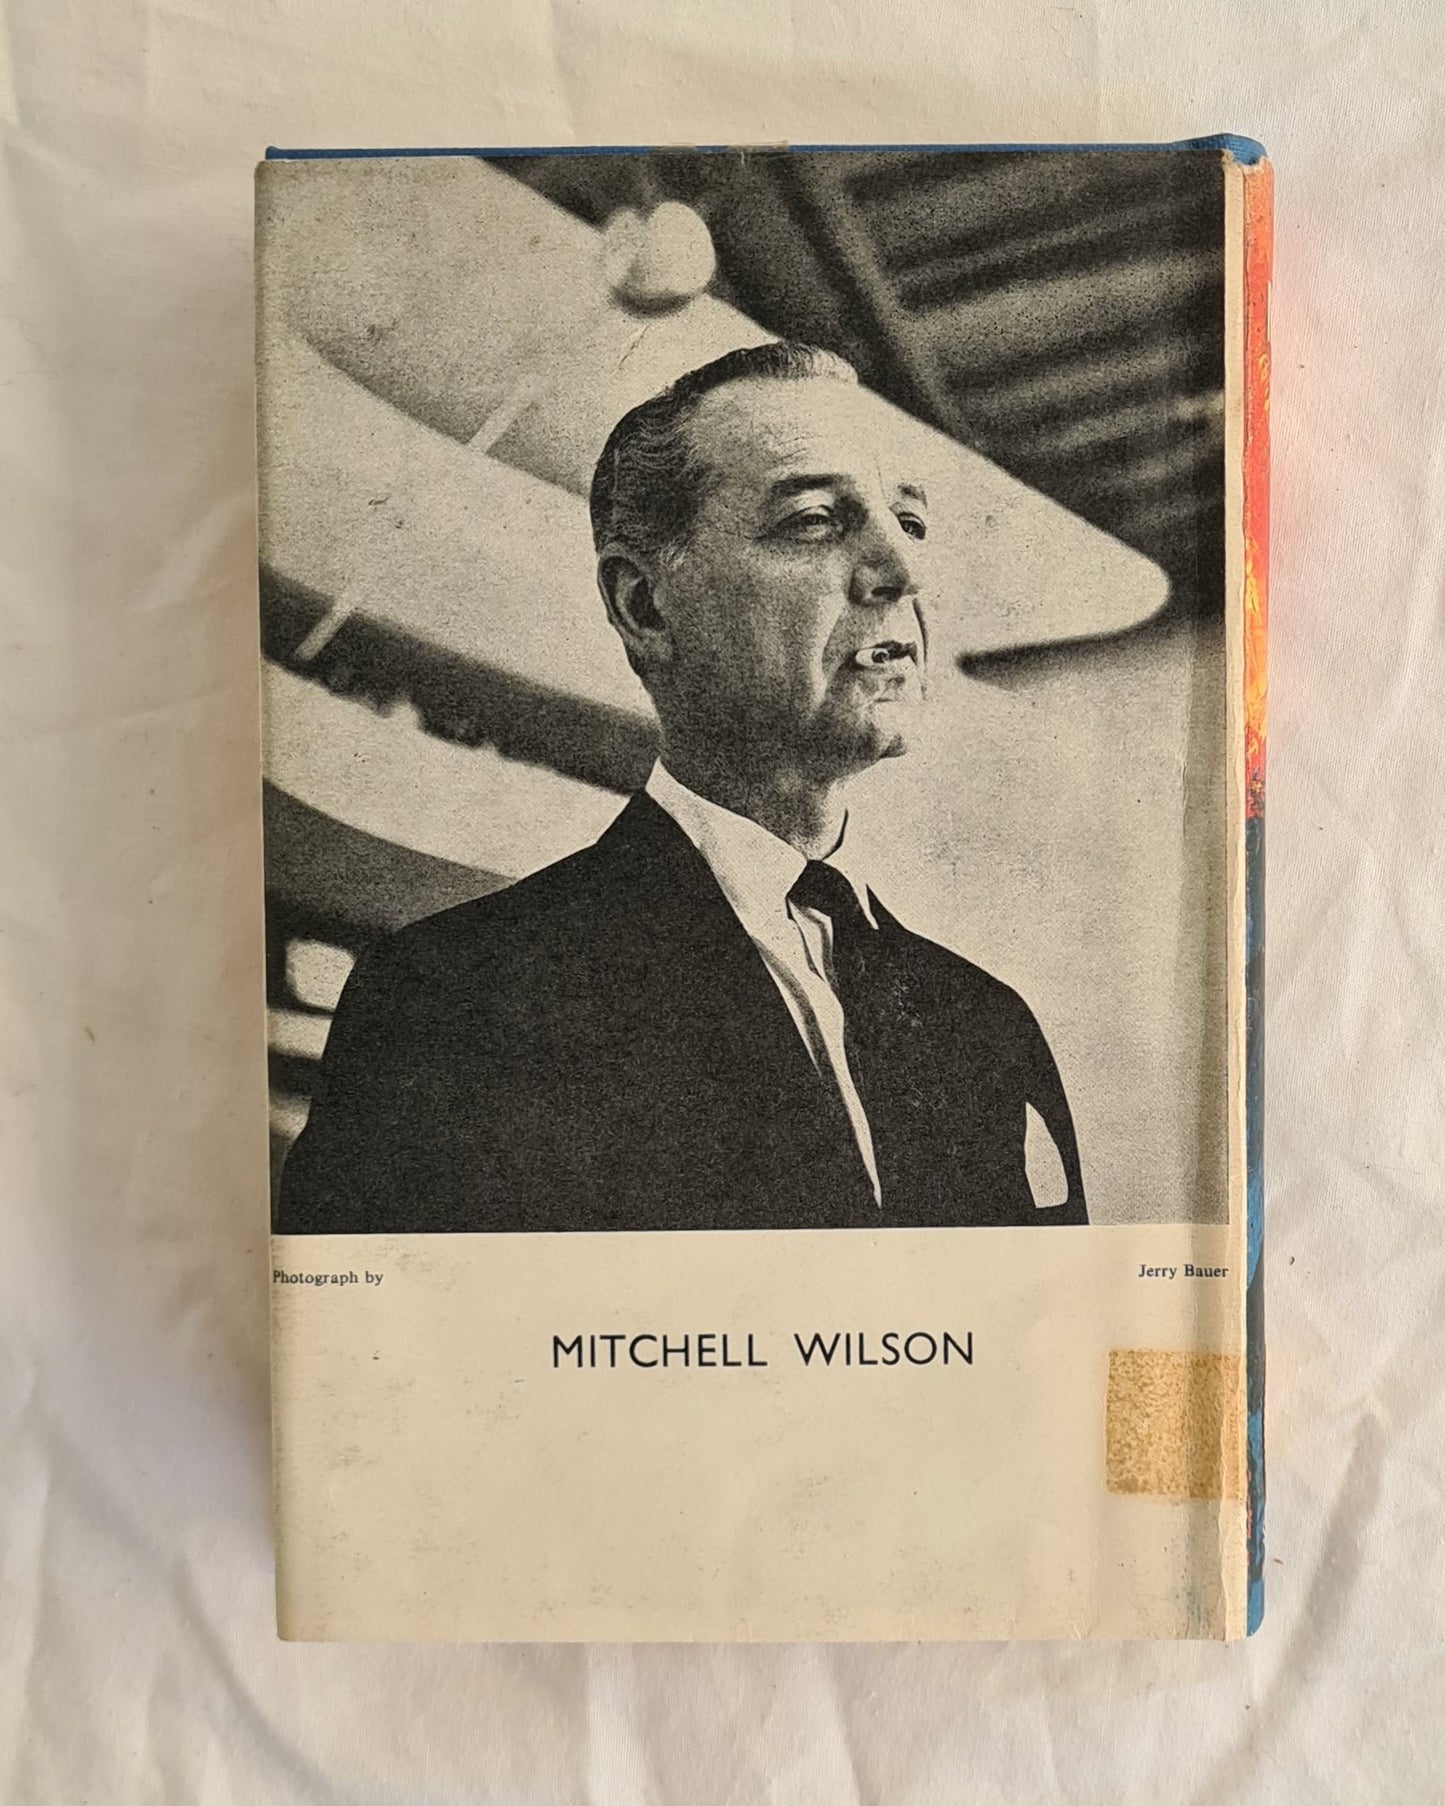 Meeting at a Far Meridian by Mitchell Wilson